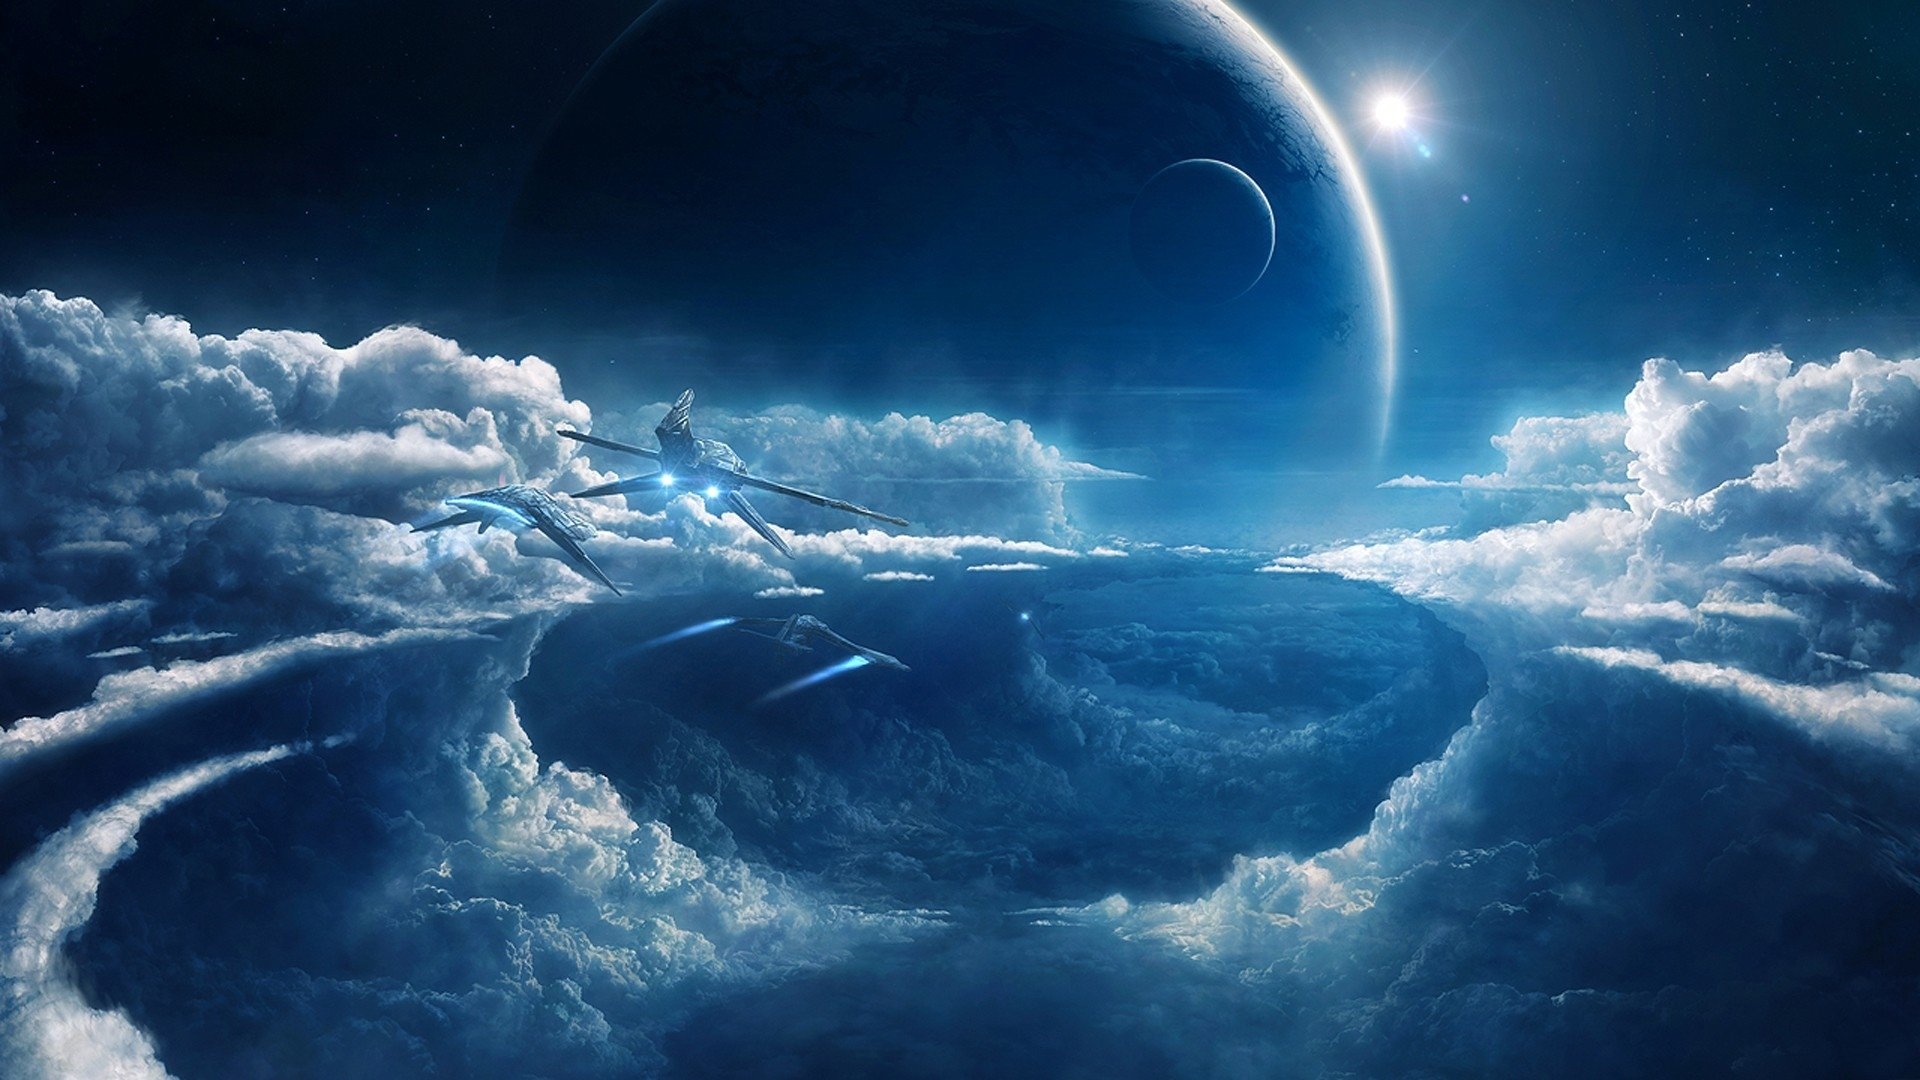 Download hd 1080p Sci Fi landscape PC background ID:232803 for free